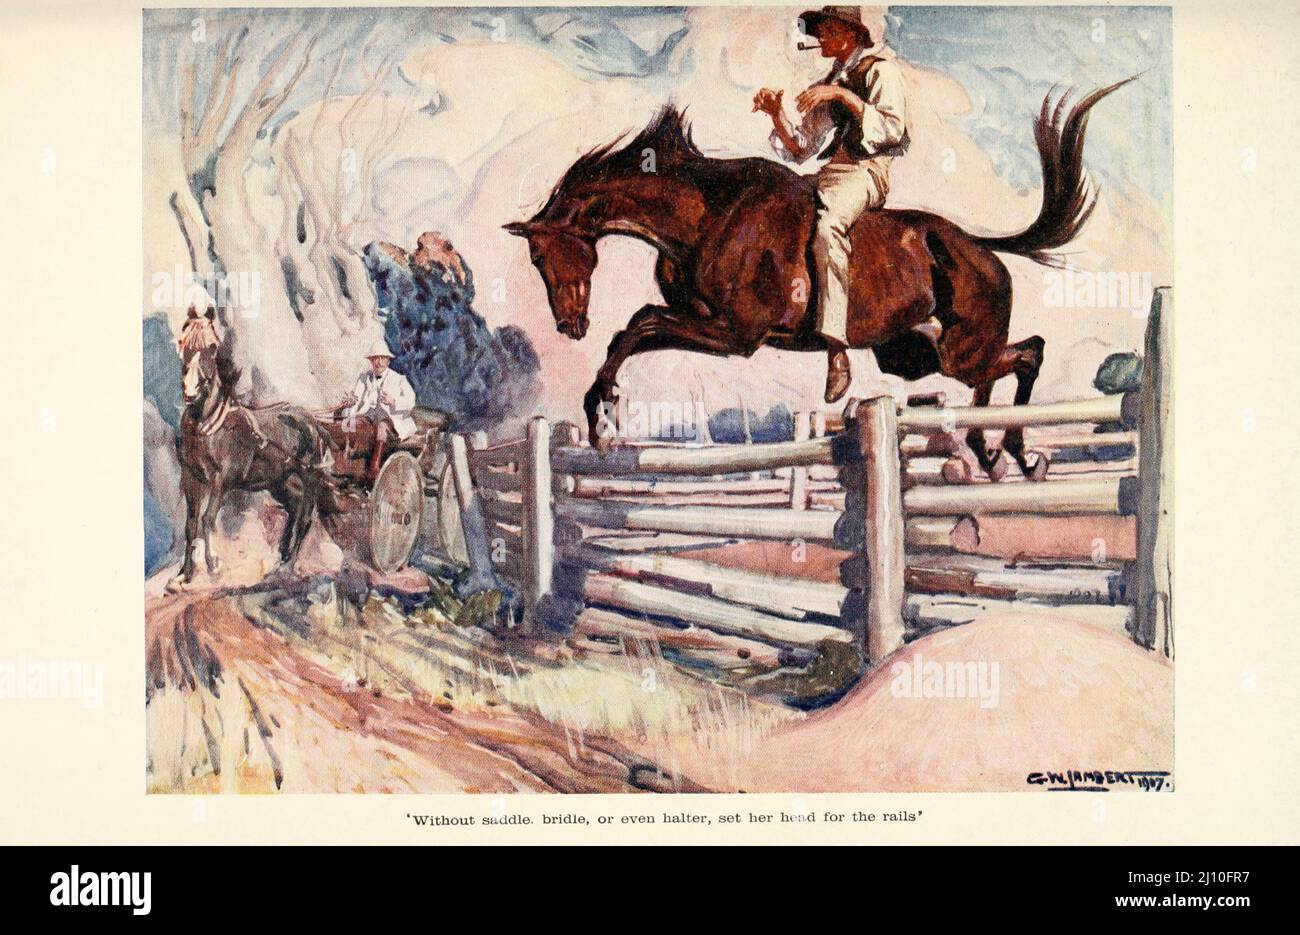 Without saddle, bridle, or even halter, set her head for the rails from the book ROMANCE OF EMPIRE : AUSTRALIA BY W. H. LANG WITH TWELVE REPRODUCTIONS FROM ORIGINAL DRAWINGS IN COLOUR BY G. W. LAMBERT Series Edited by John Lang Published London and Edinburgh : T. C. & E. C. Jack in 1908 Stock Photo